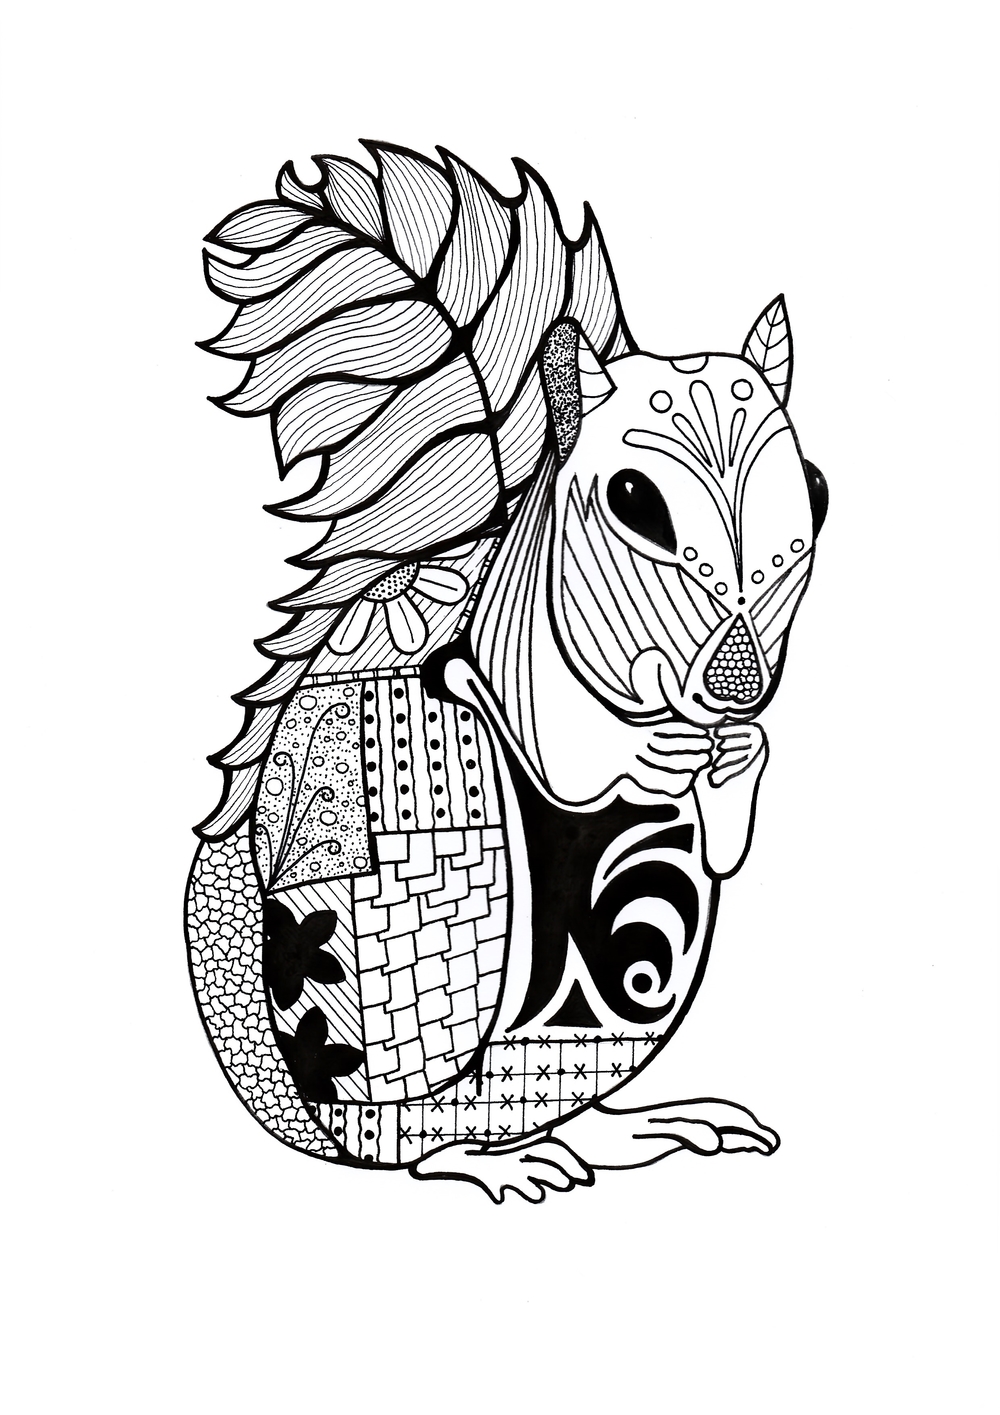 Intricate Squirrel Adult Coloring Page | FaveCrafts.com